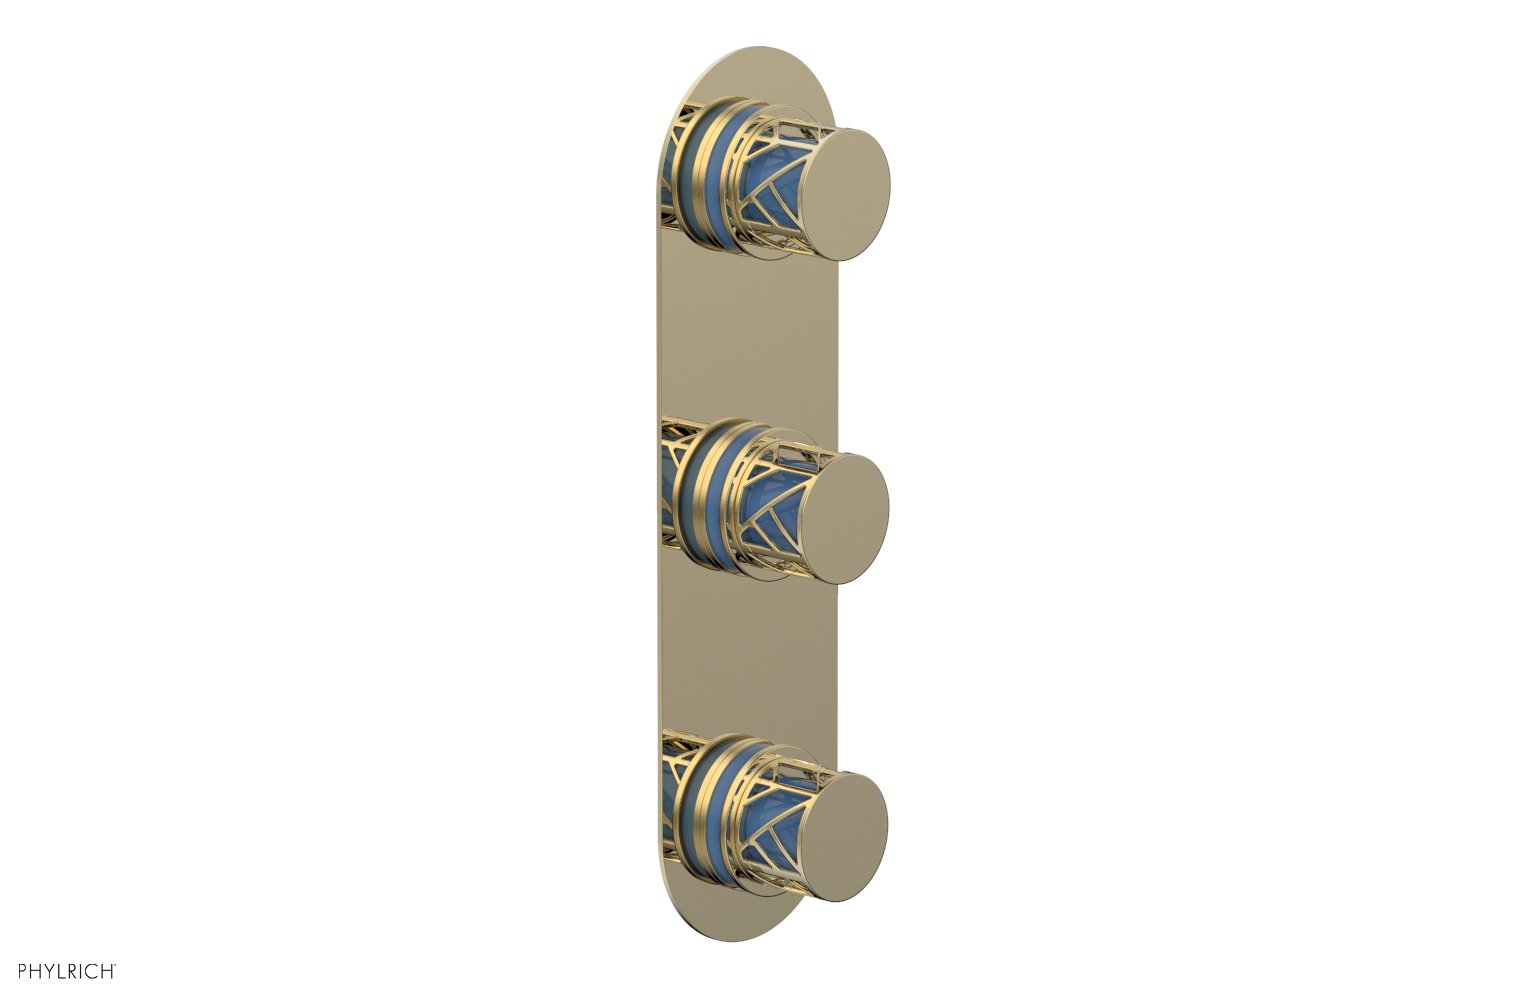 Phylrich JOLIE Thermostatic Valve with Two Volume Control with "Light Blue" Accents